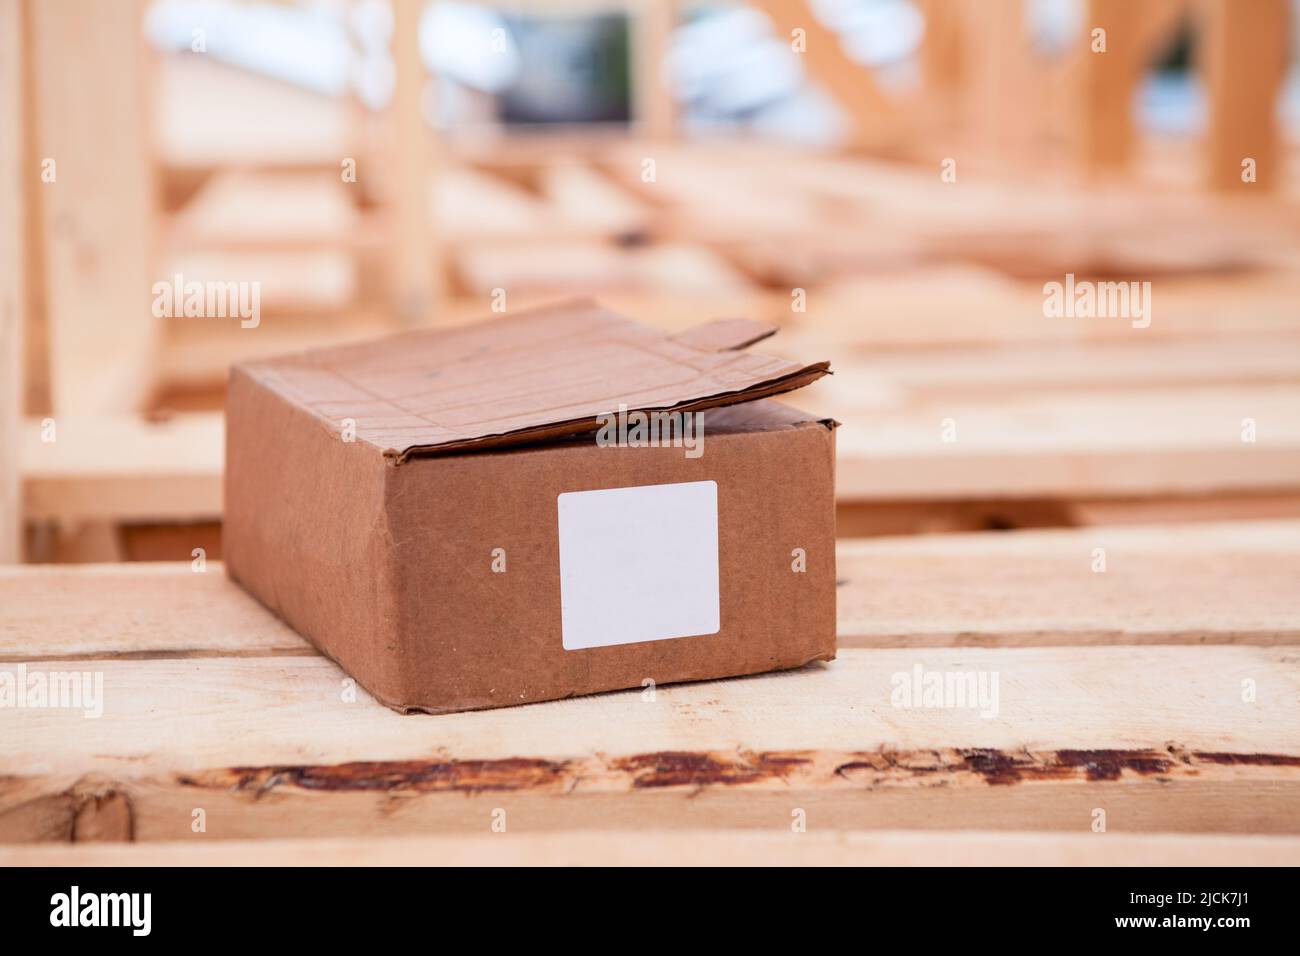 Cardboard box with construction nails or self-tapping screws, blank marking sticker for text Stock Photo